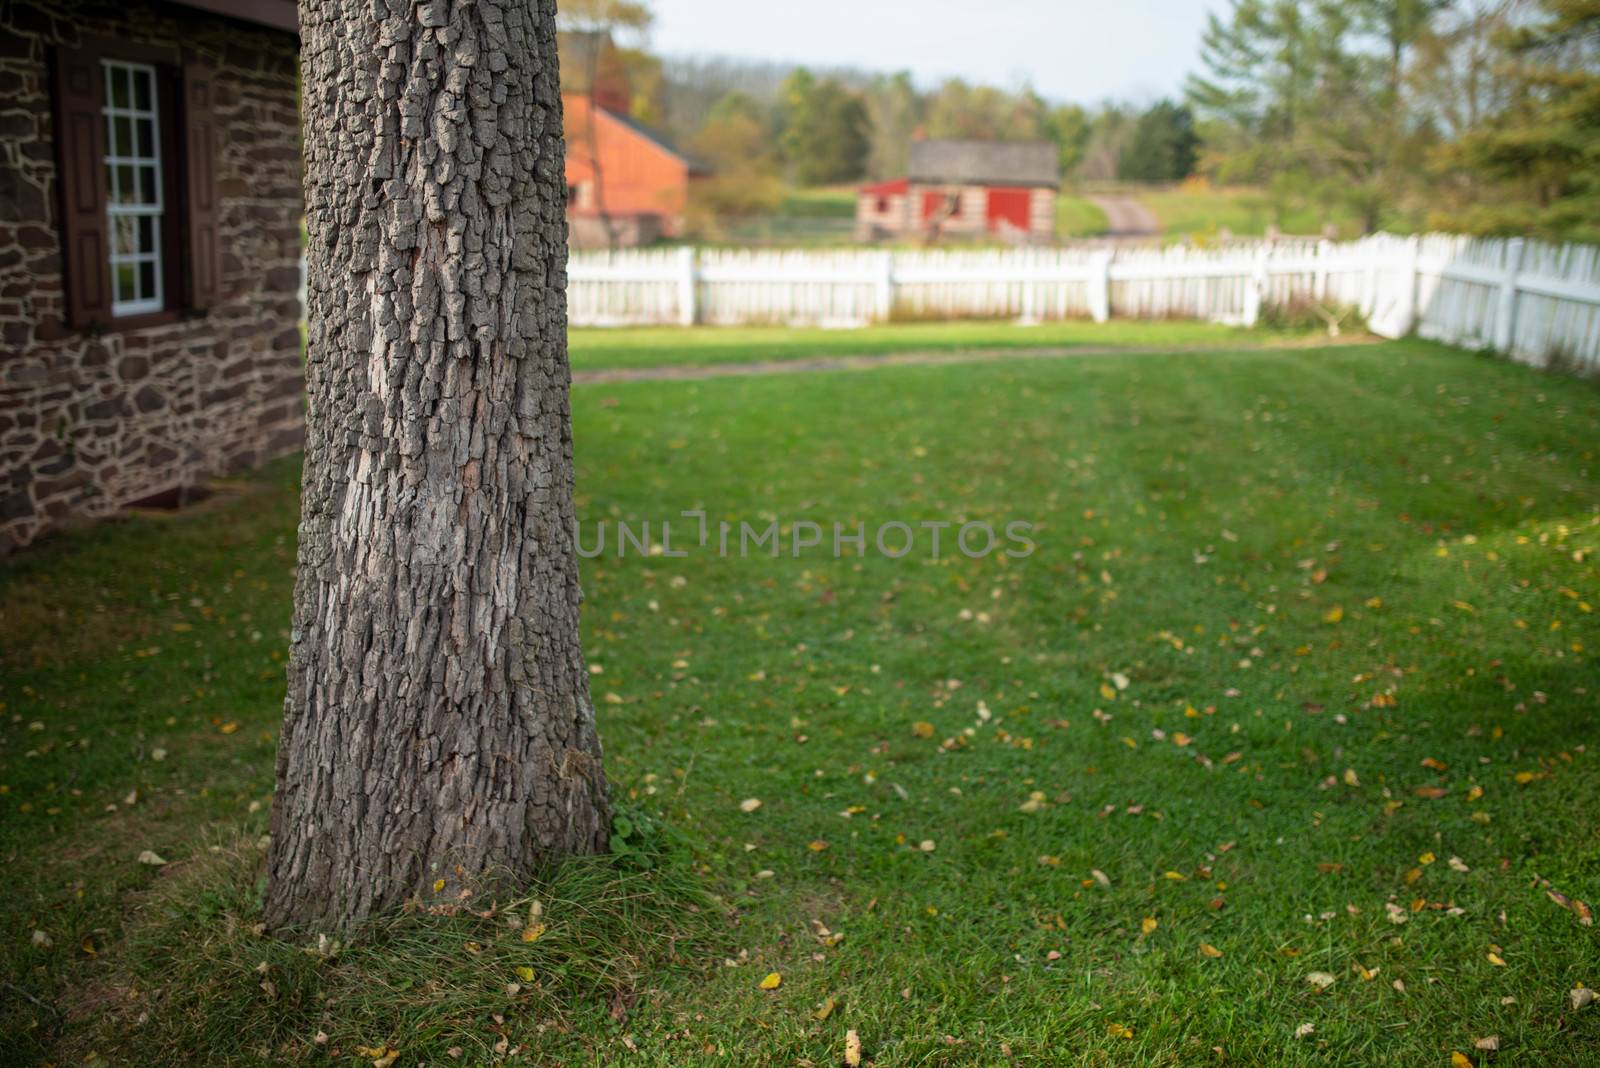 Idyllic old fashioned rural farm scene with stone house, white picket fence and barn. Focus on off center tree, defocused copy space grass. Positive emotion, warm traditional feeling and manicured lawn.